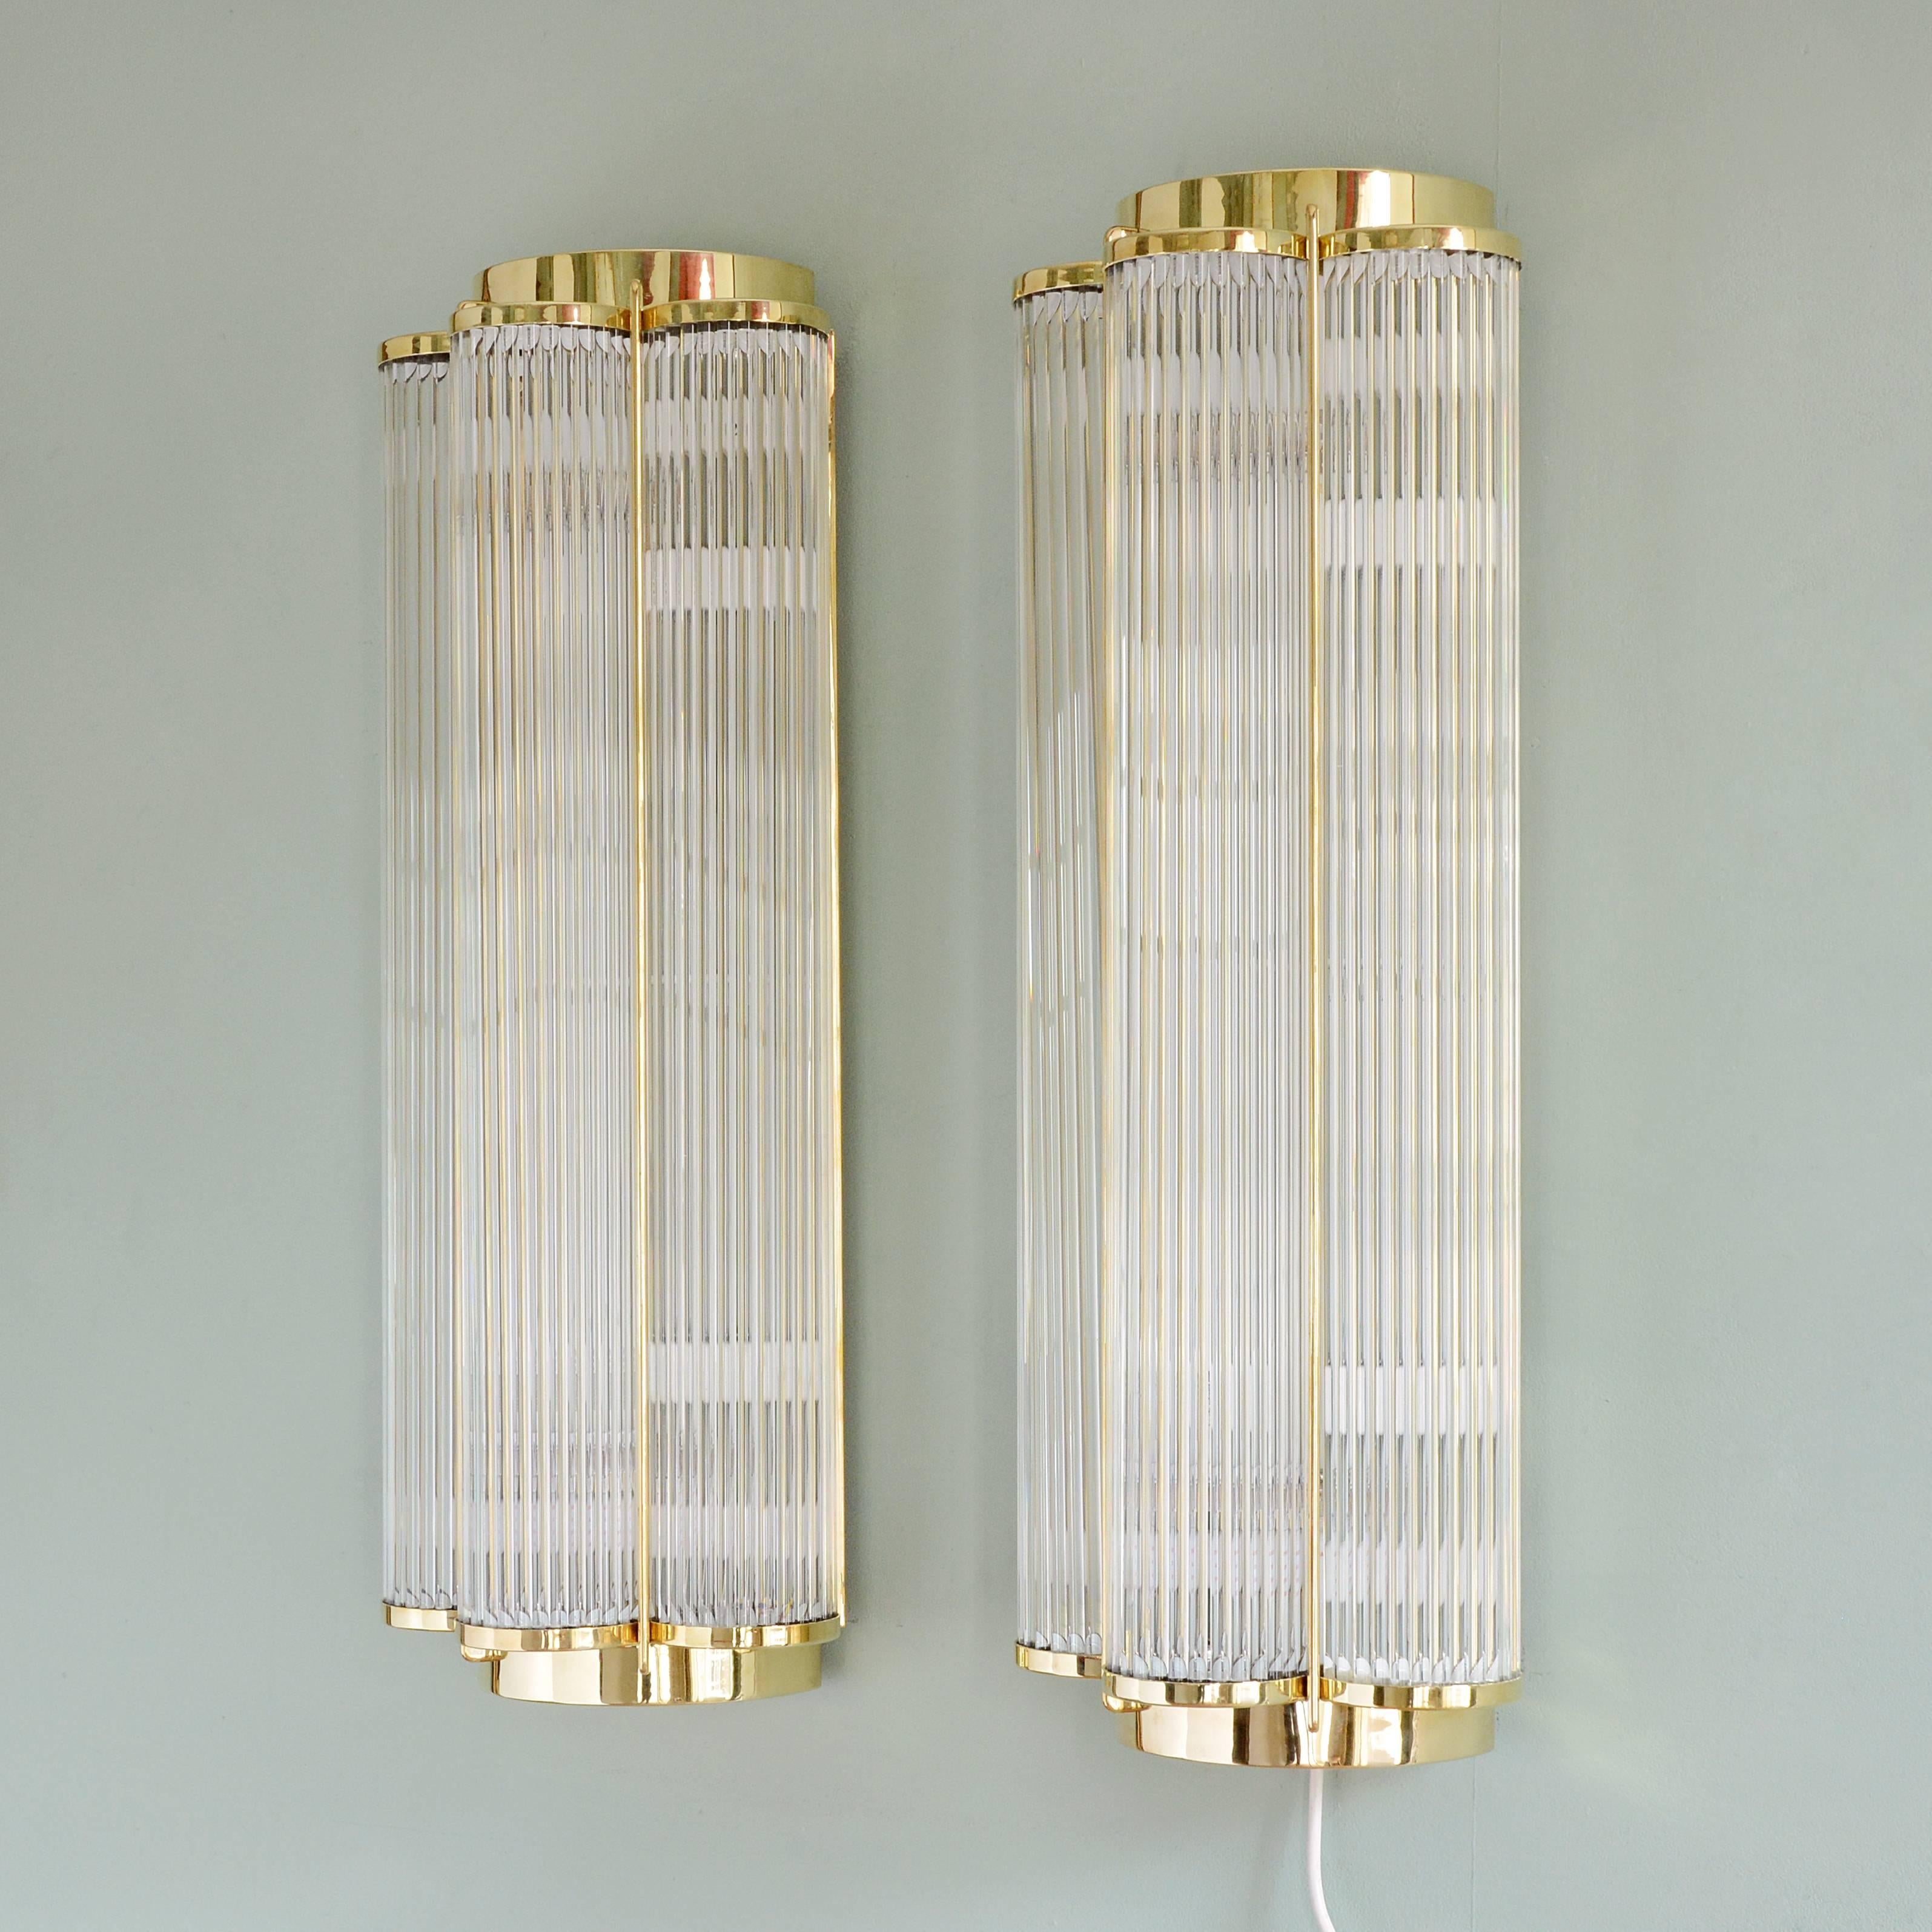 A pair of large Art Deco style wall lights, made by Lassco, with brass and glass rod trefoil body and four internal light fittings. Made to order in England in the traditional manner, lead time usually around six weeks.

Dimensions: 83cm (32¾